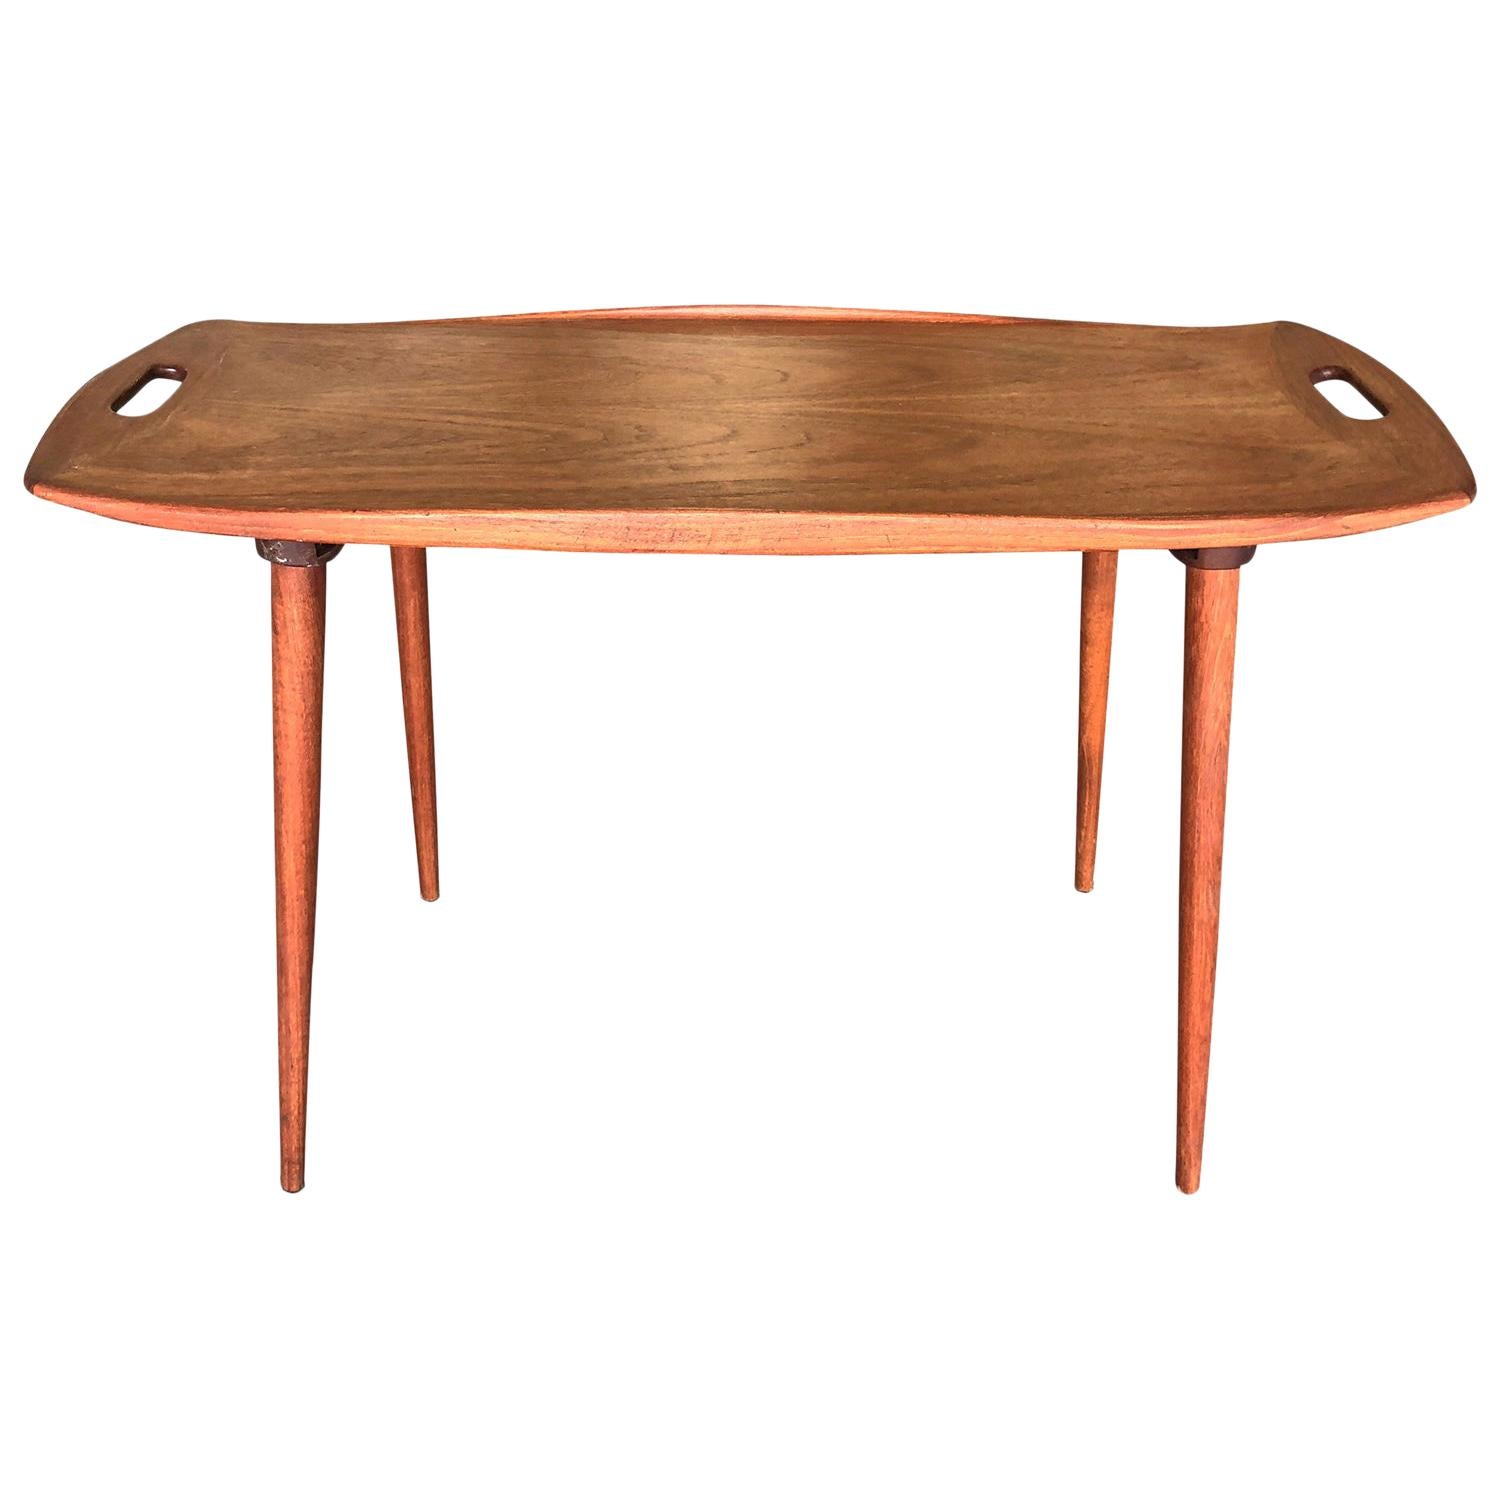 Coffe Table By Jens Quistgaard For Sale At 1stdibs 